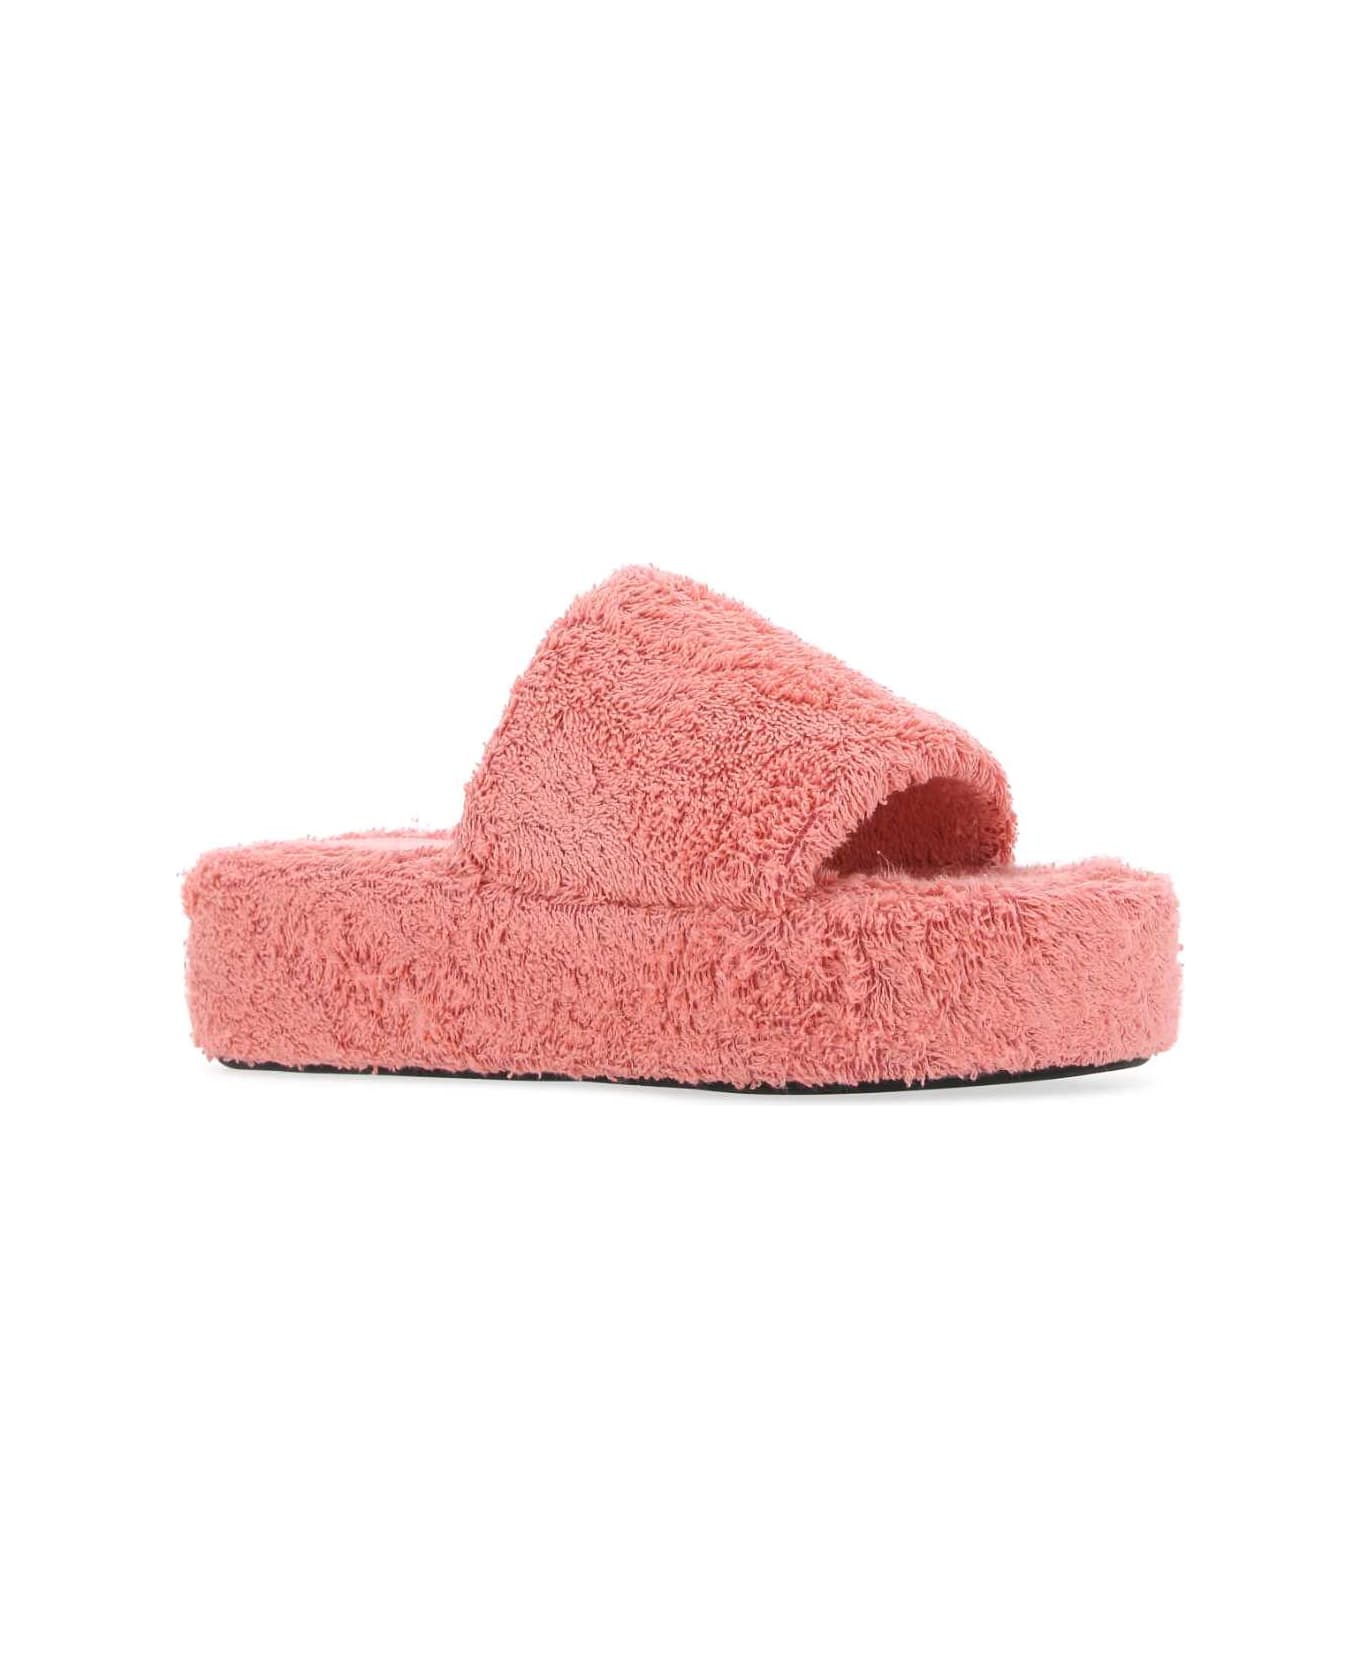 Balenciaga Pink Terry Fabric Rise Slippers - 5900